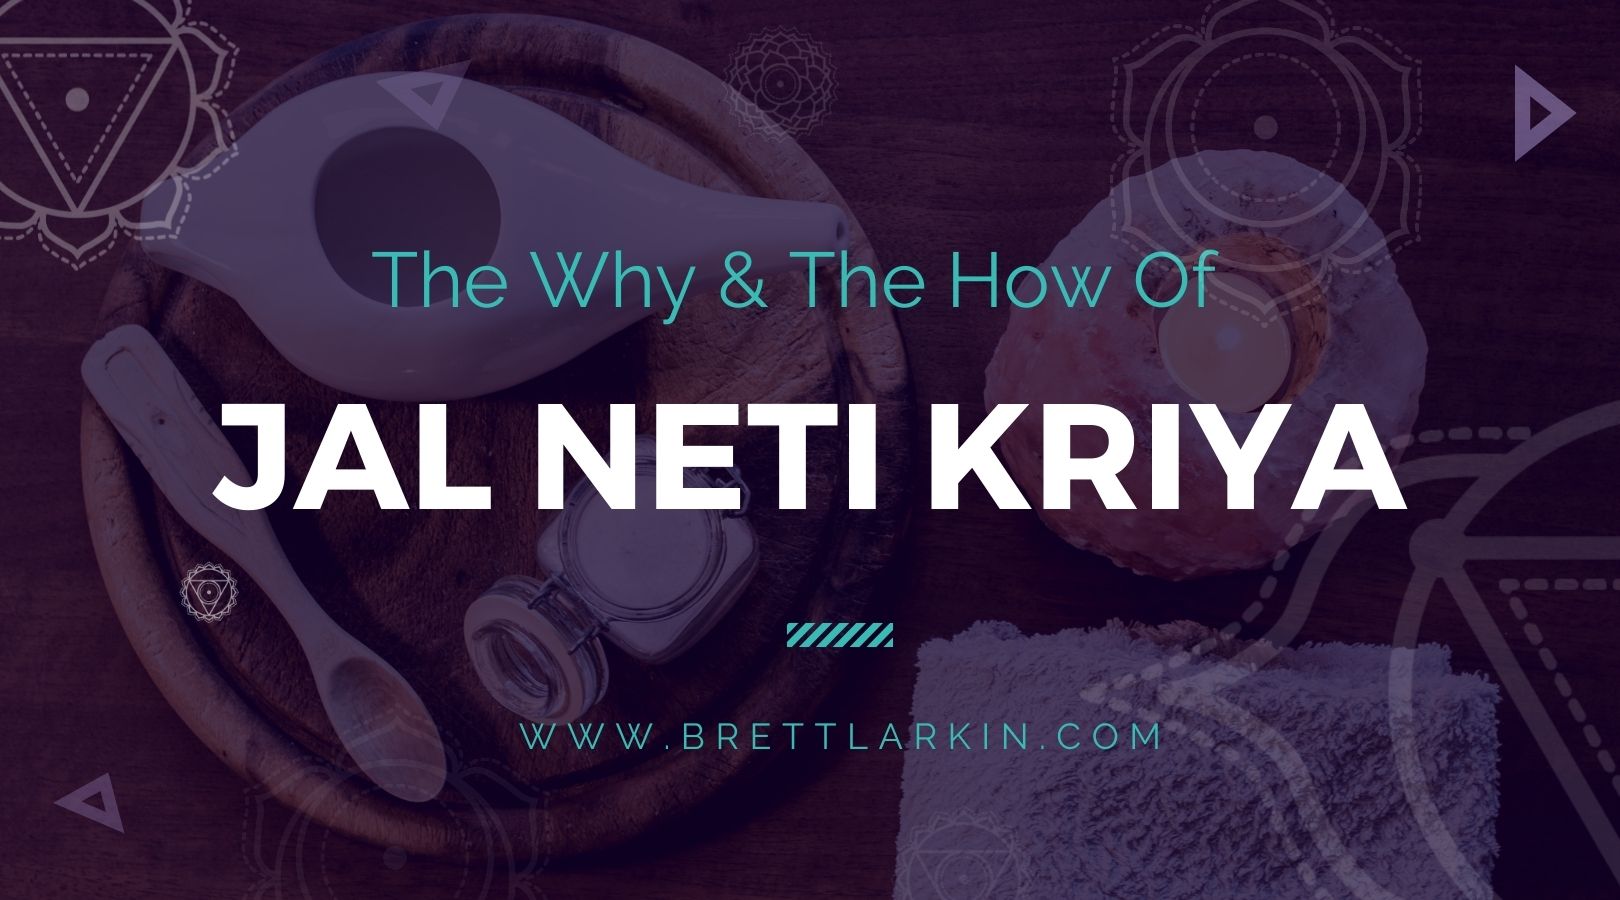 Jal Neti Kriya: The Best Thing You Can Do To Clear Your Head